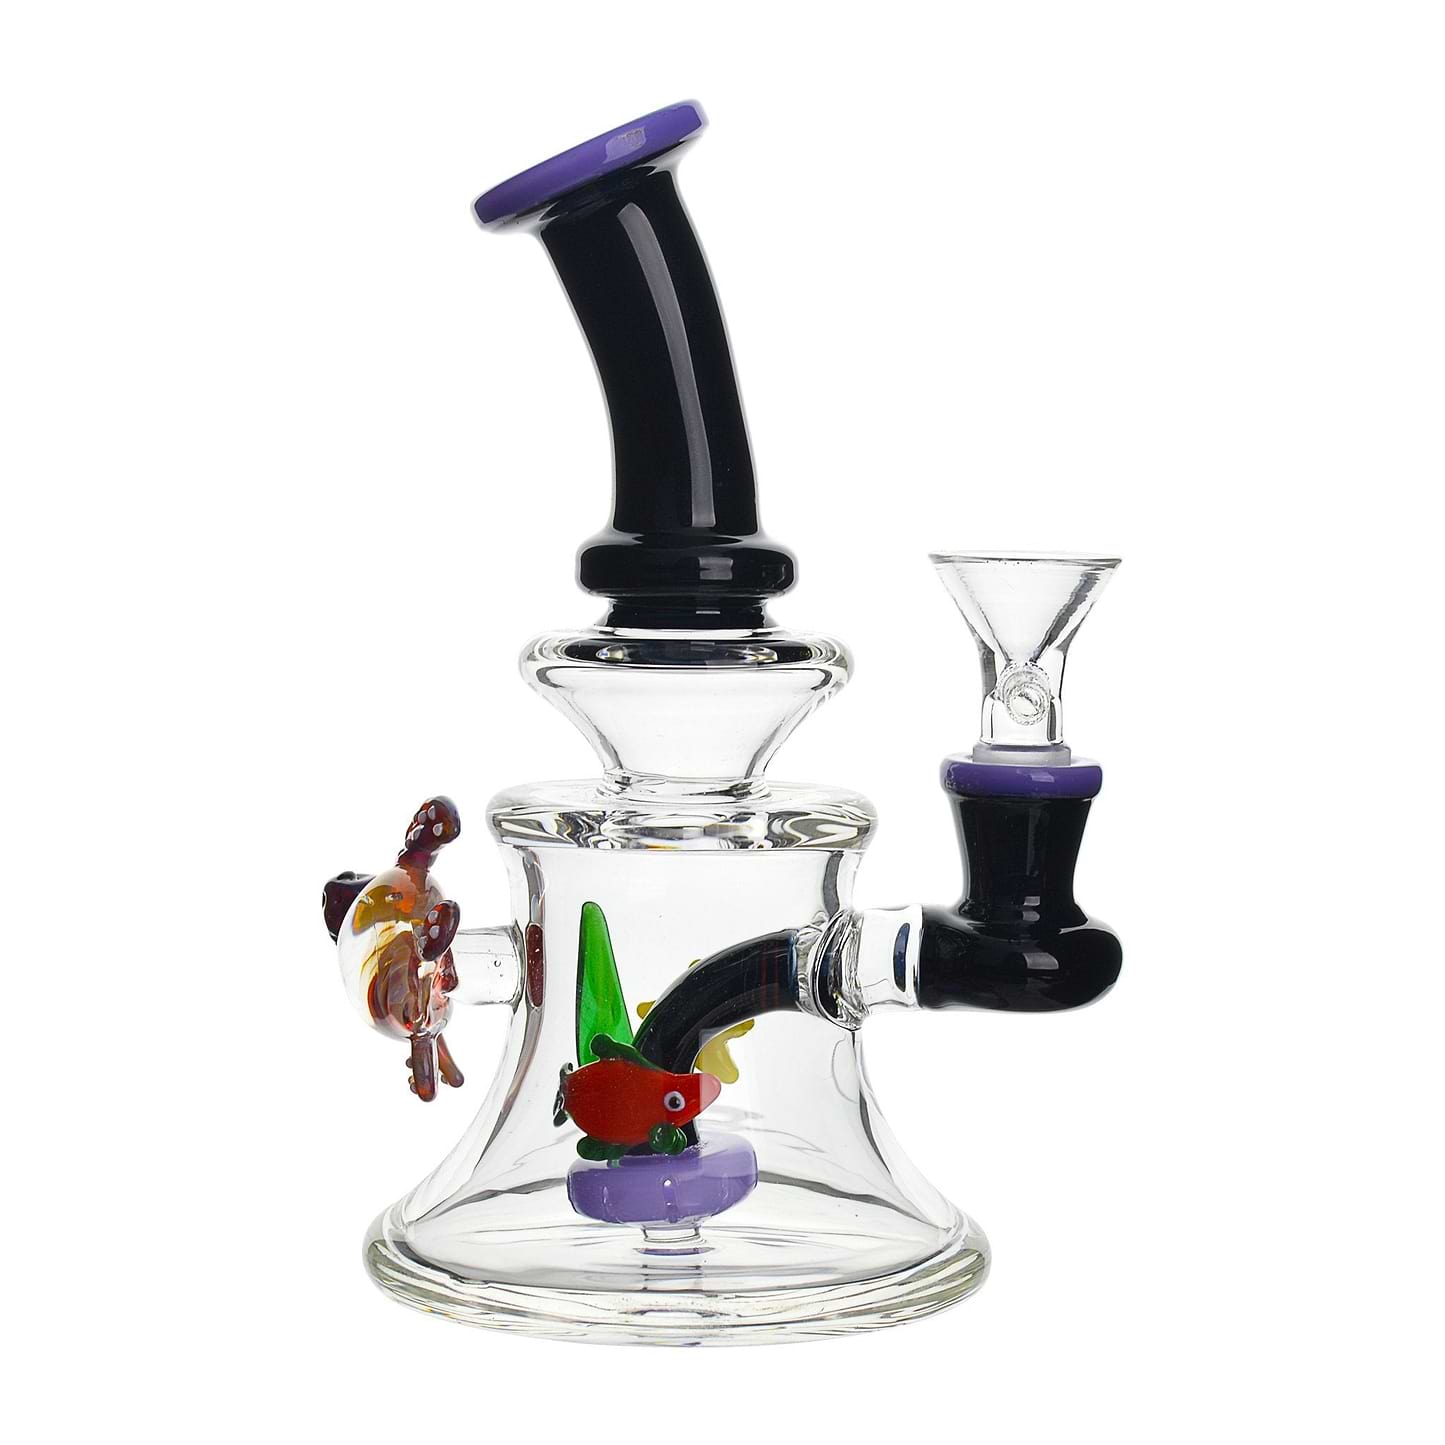 7-inch clear glass bong smoking device built-in ash catcher colorful fish 2 turtle figures inside an aquarium look